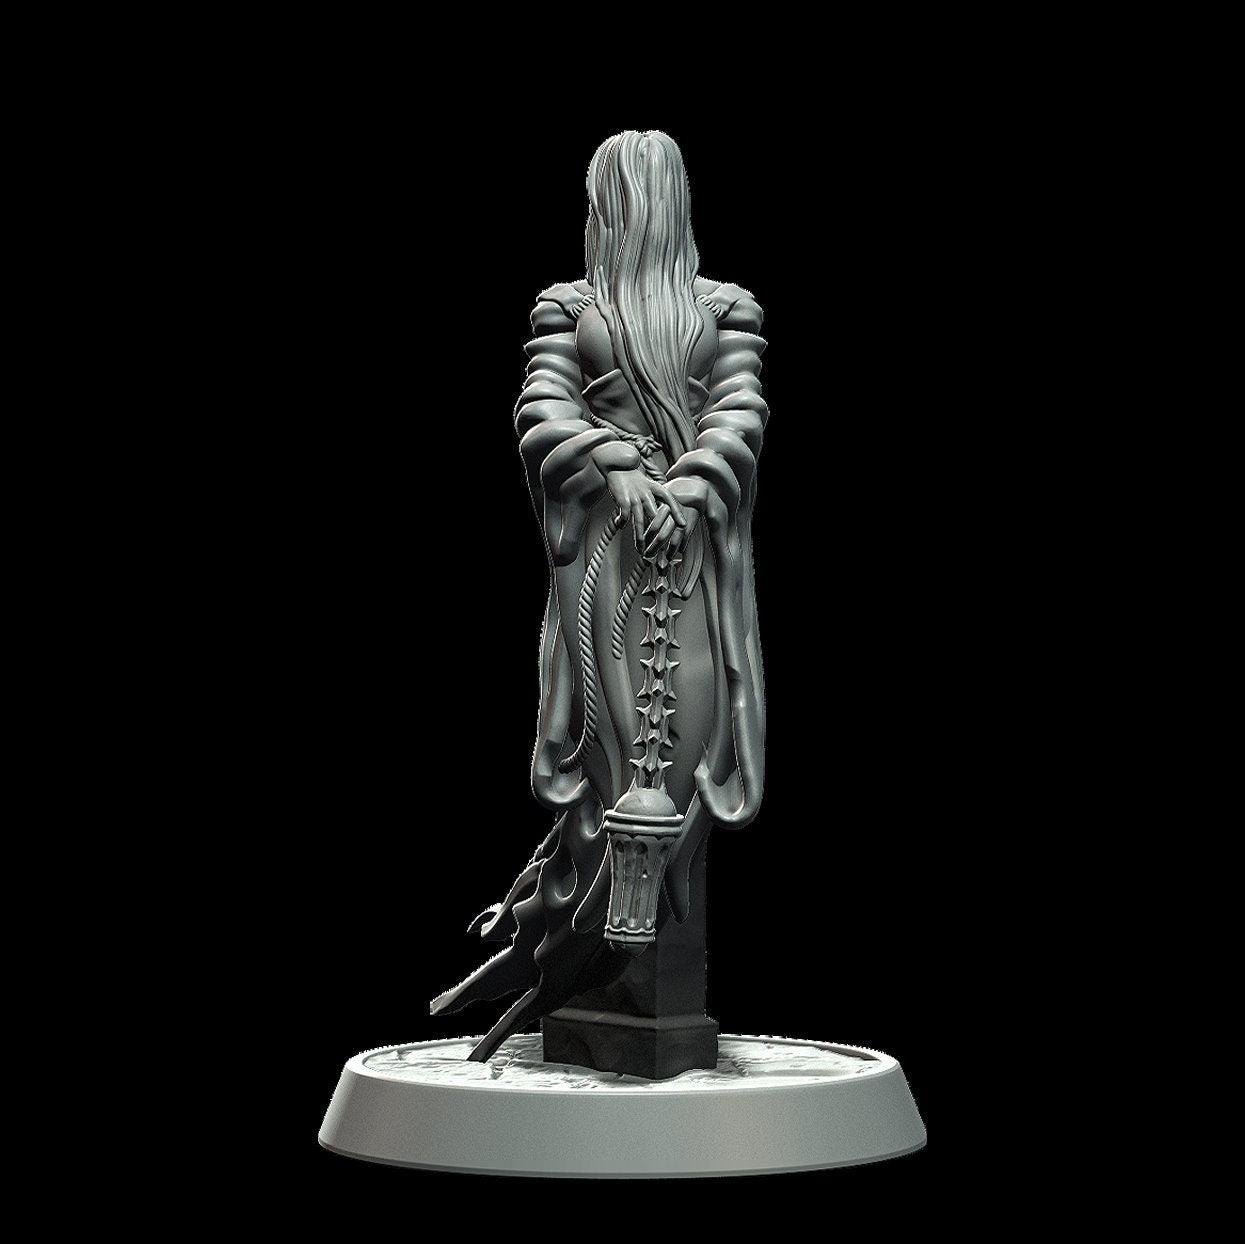 Banshee Miniature undead miniature ghost miniature - 5 Poses - 28mm scale Tabletop gaming DnD Miniature Dungeons and Dragons,dnd 5e - Plague Miniatures shop for DnD Miniatures